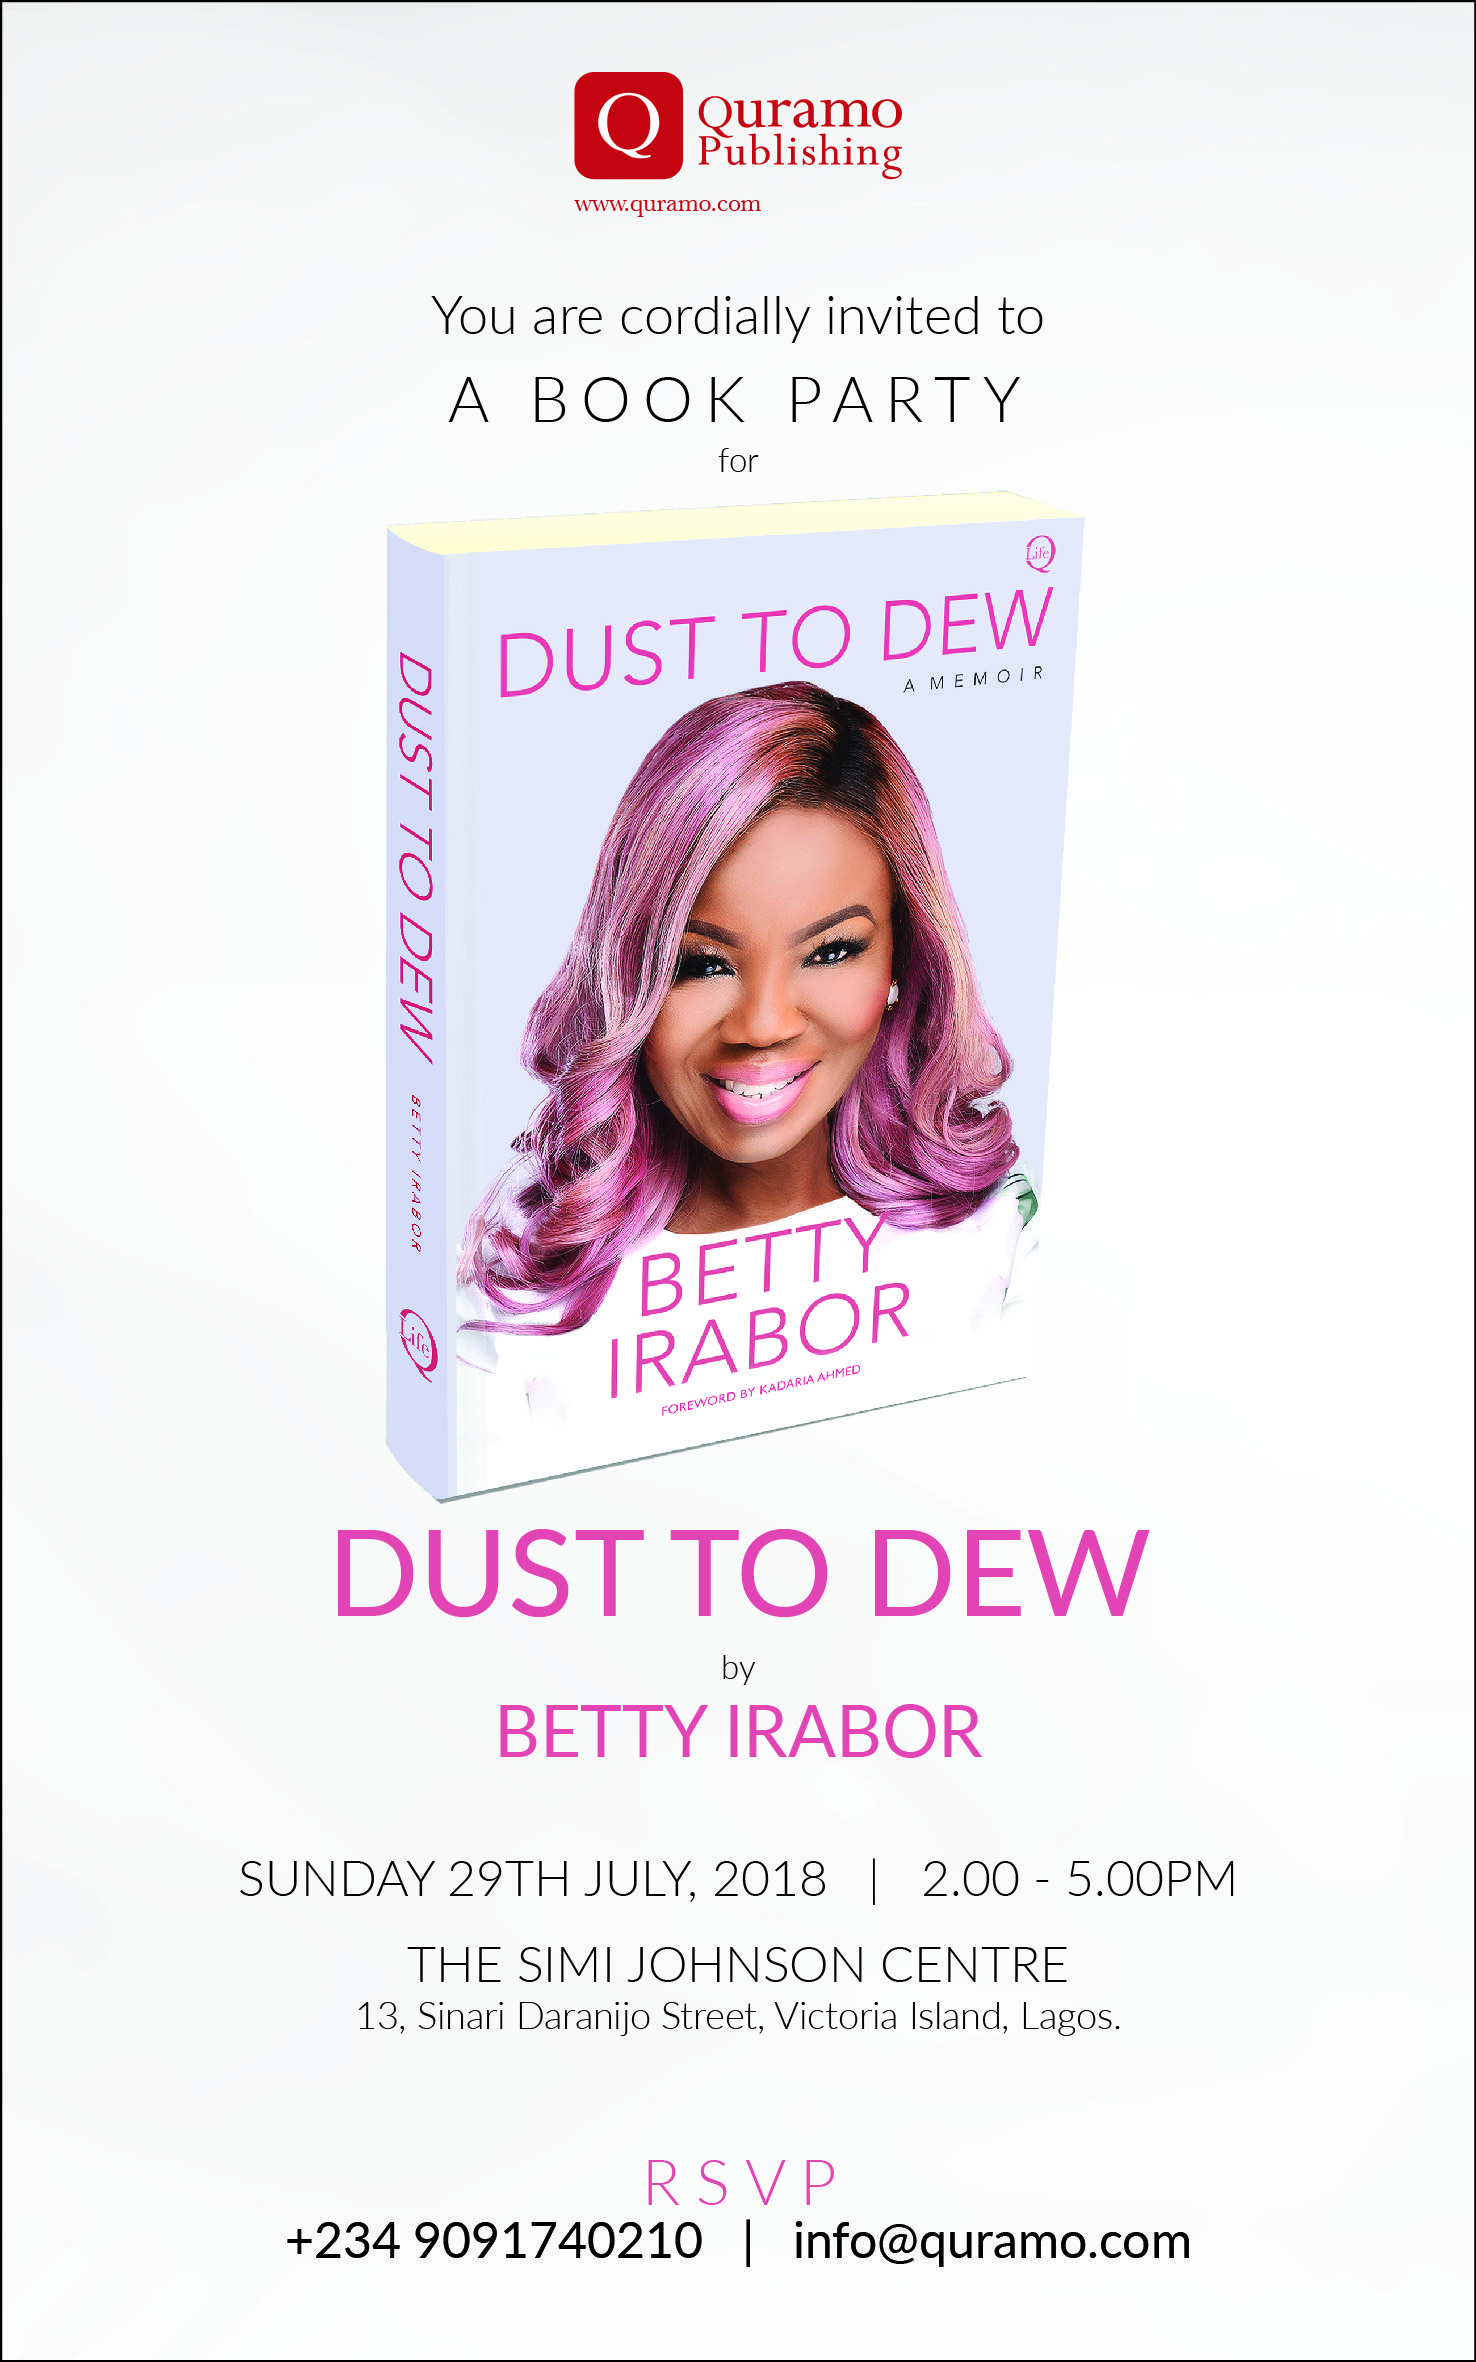 The ”Dust To Dew” Book Party